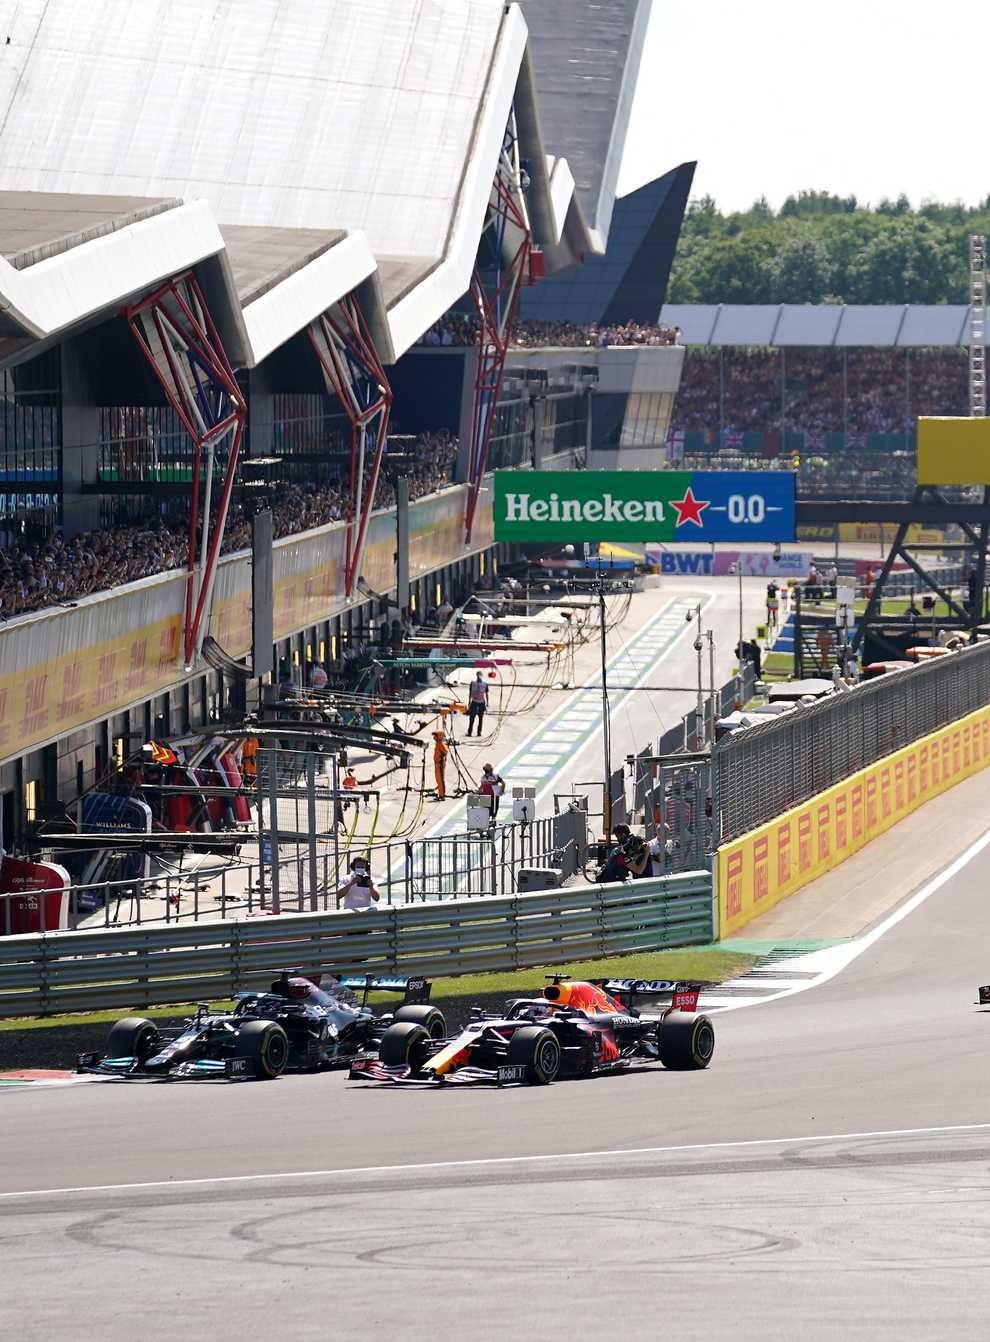 Mercedes’ Lewis Hamilton and Red Bull Racing’s Max Verstappen lead the race at the start of the race during the British Grand Prix at Silverstone, Towcester. Picture Date: Sunday July 18, 2021.